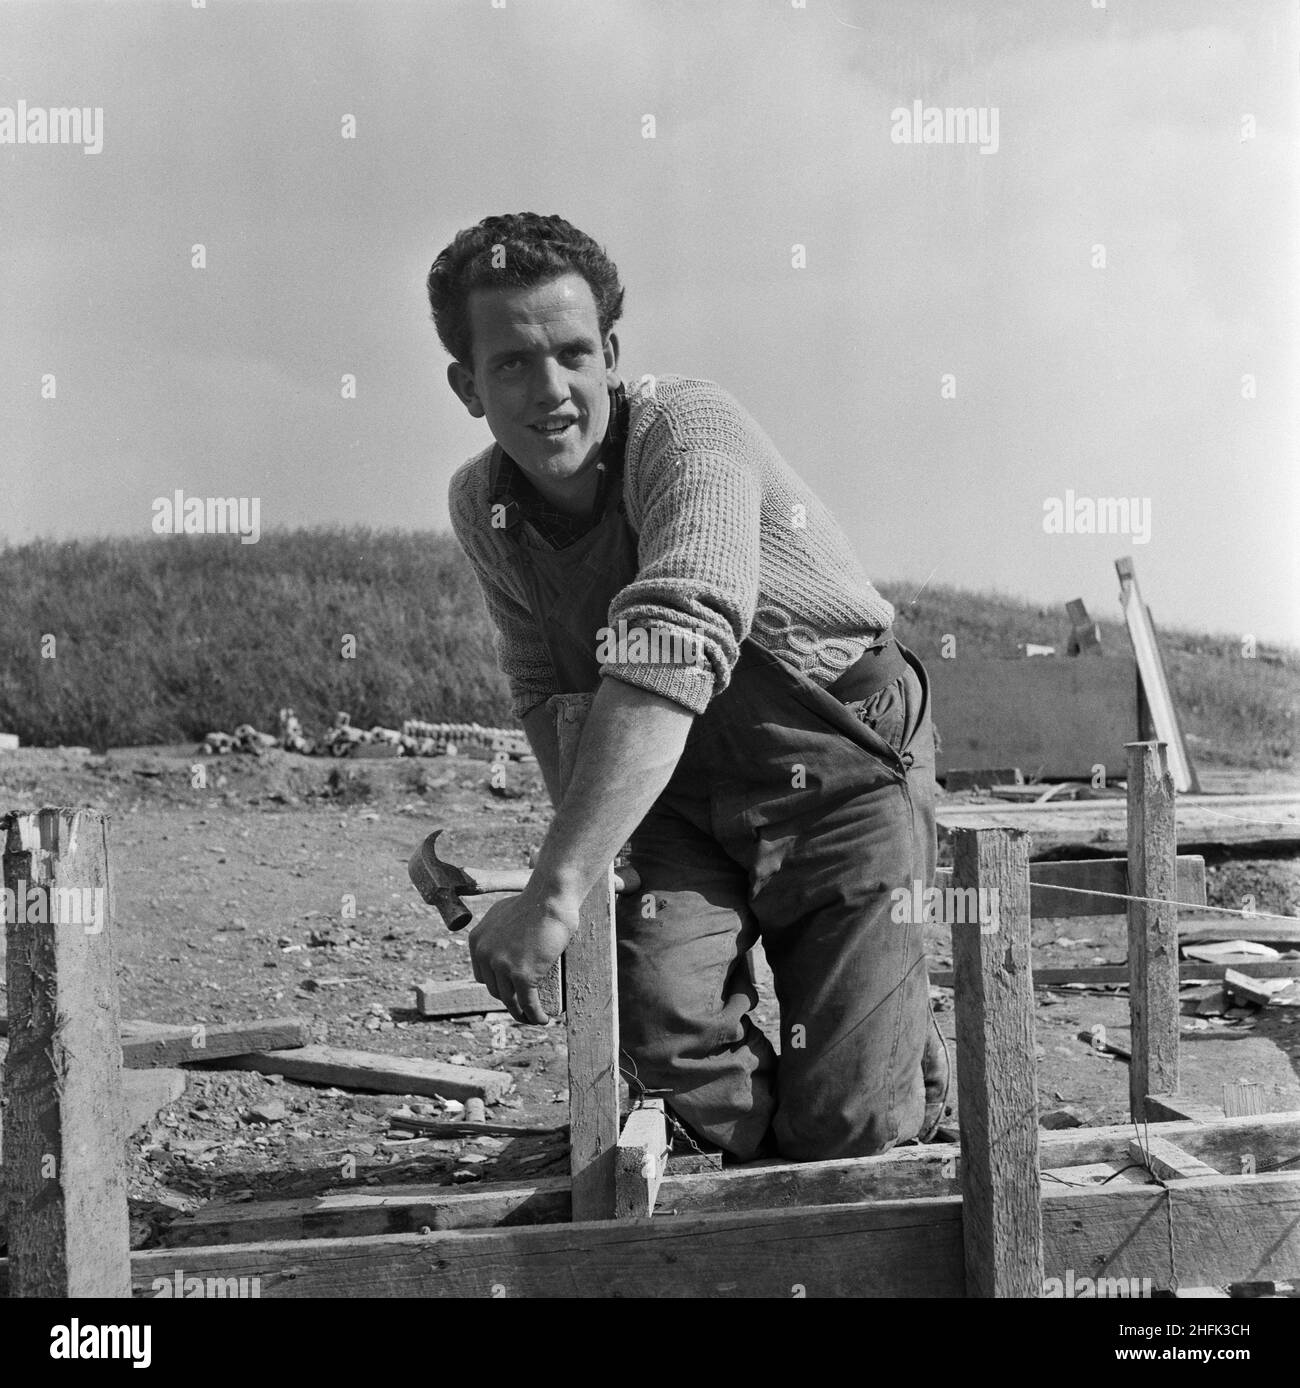 County High School, Gedling Road, Arnold, Gedling, Nottinghamshire, 25/09/1958. M Williamson, an apprentice joiner, working on the construction of Arnold County High School. M Williamson was featured as Apprentice of the Month in the November 1958 issue of Team Spirit, the Laing company newsletter. Born in Doncaster, the son of a miner, he joined the company in 1953, preferring an outdoor job to following his father into the pit. Williamson worked on a number of projects in Richmond, Yorkshire, and Birmingham and would complete his apprenticeship in May 1959. Stock Photo